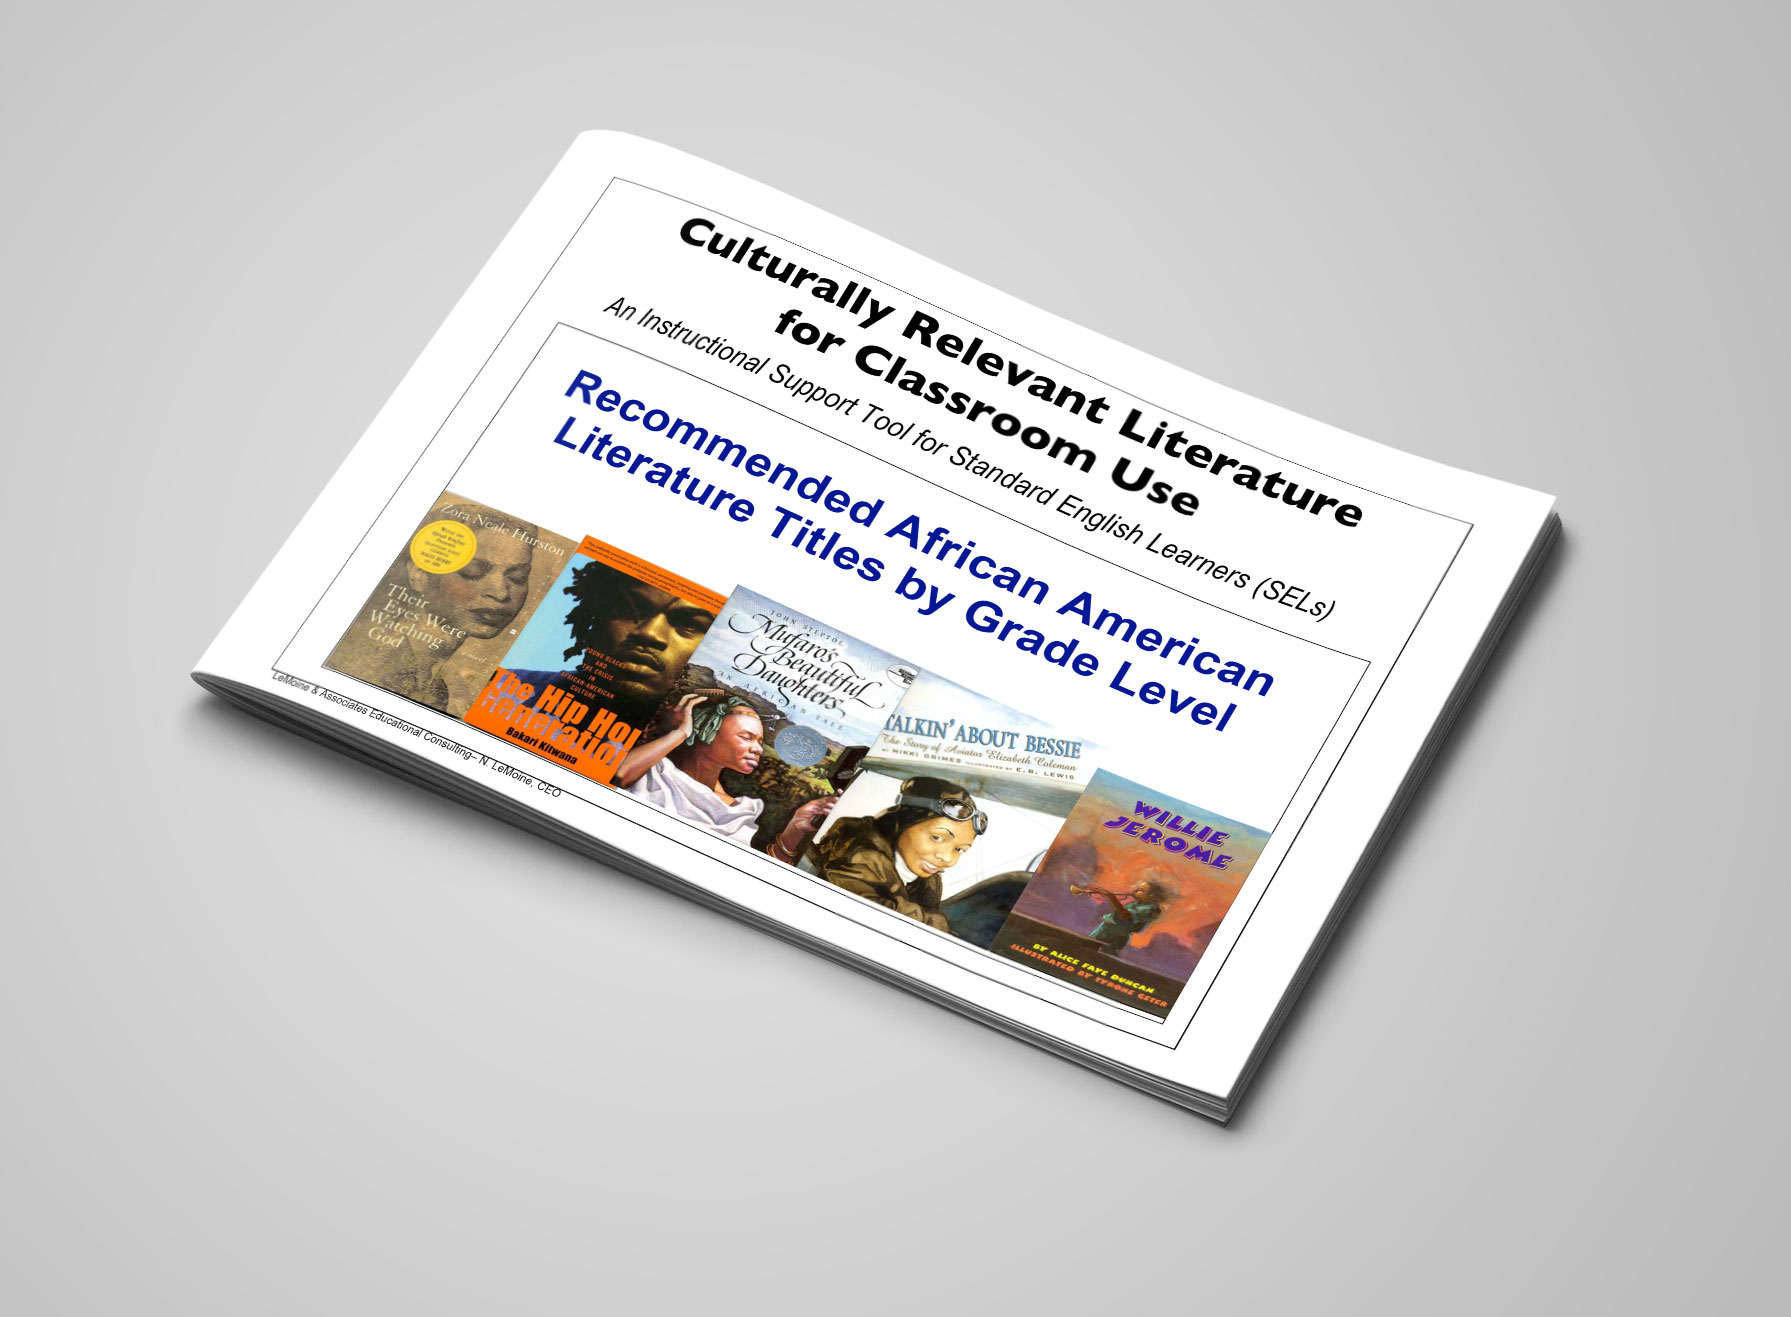 Culturally Relevant Literature for Classroom Use Recommended African American Literature Titles by Grade Level